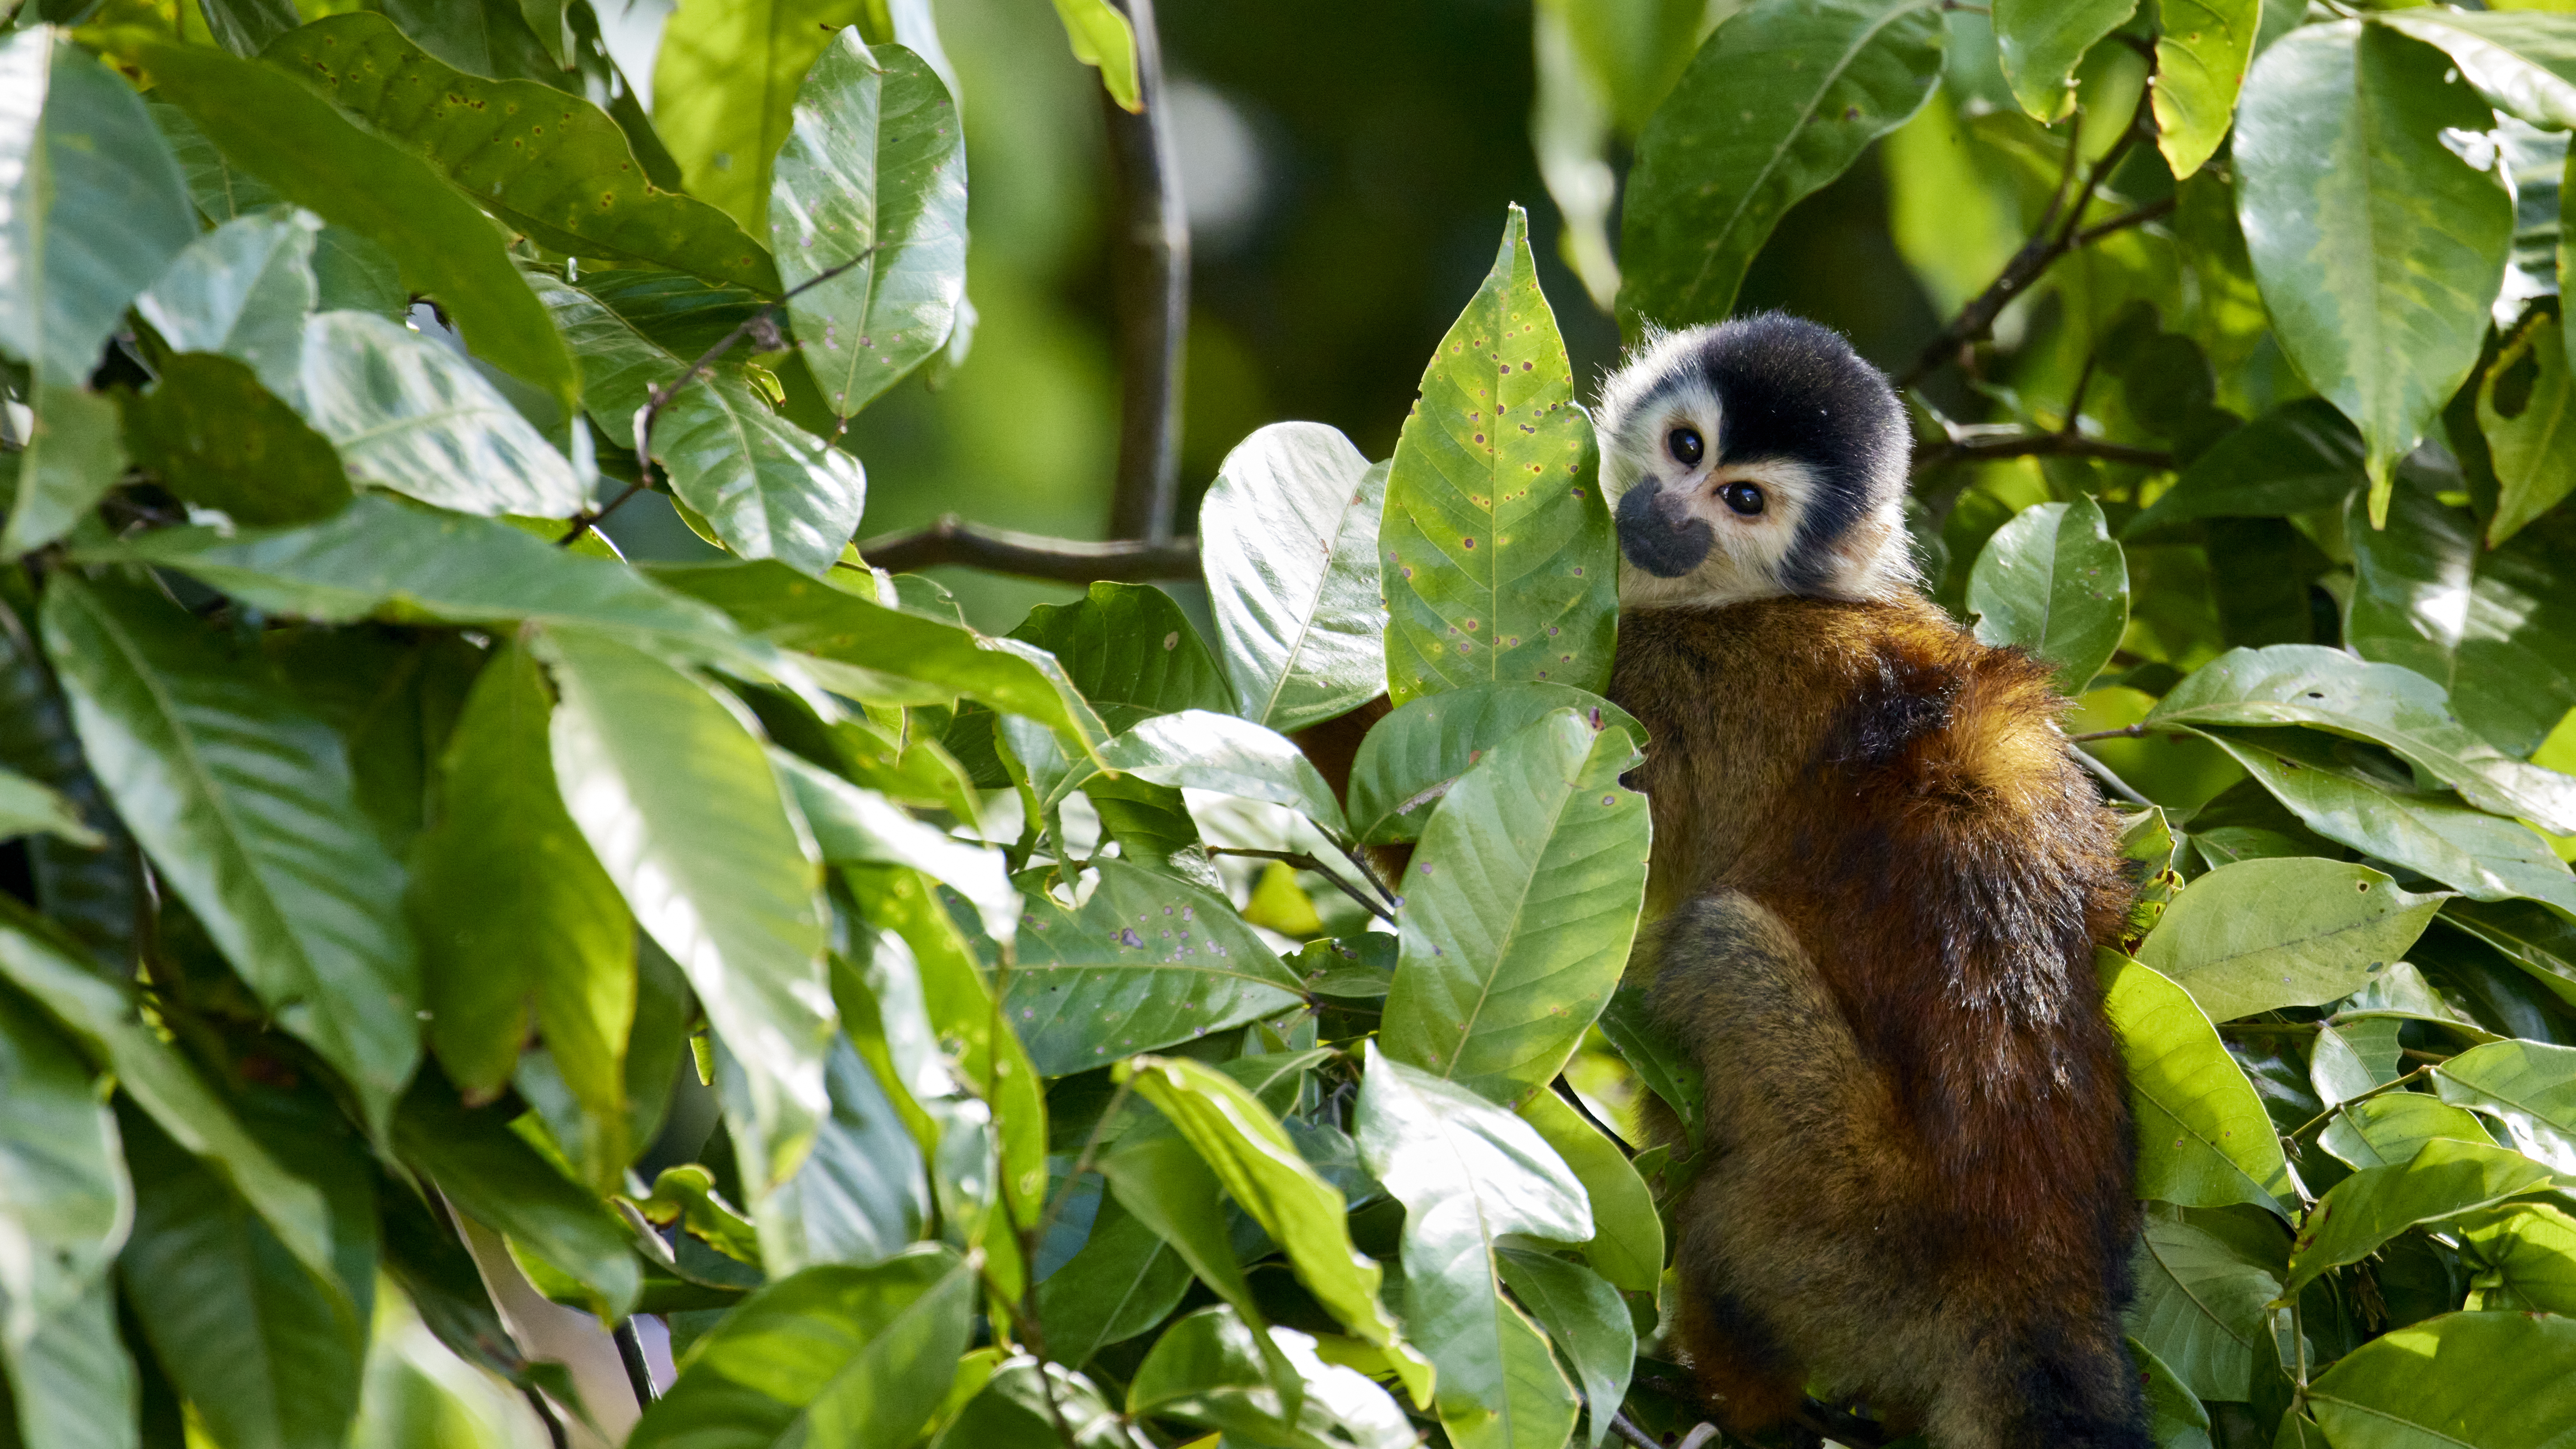 Squirrel monkey looking back - image 12